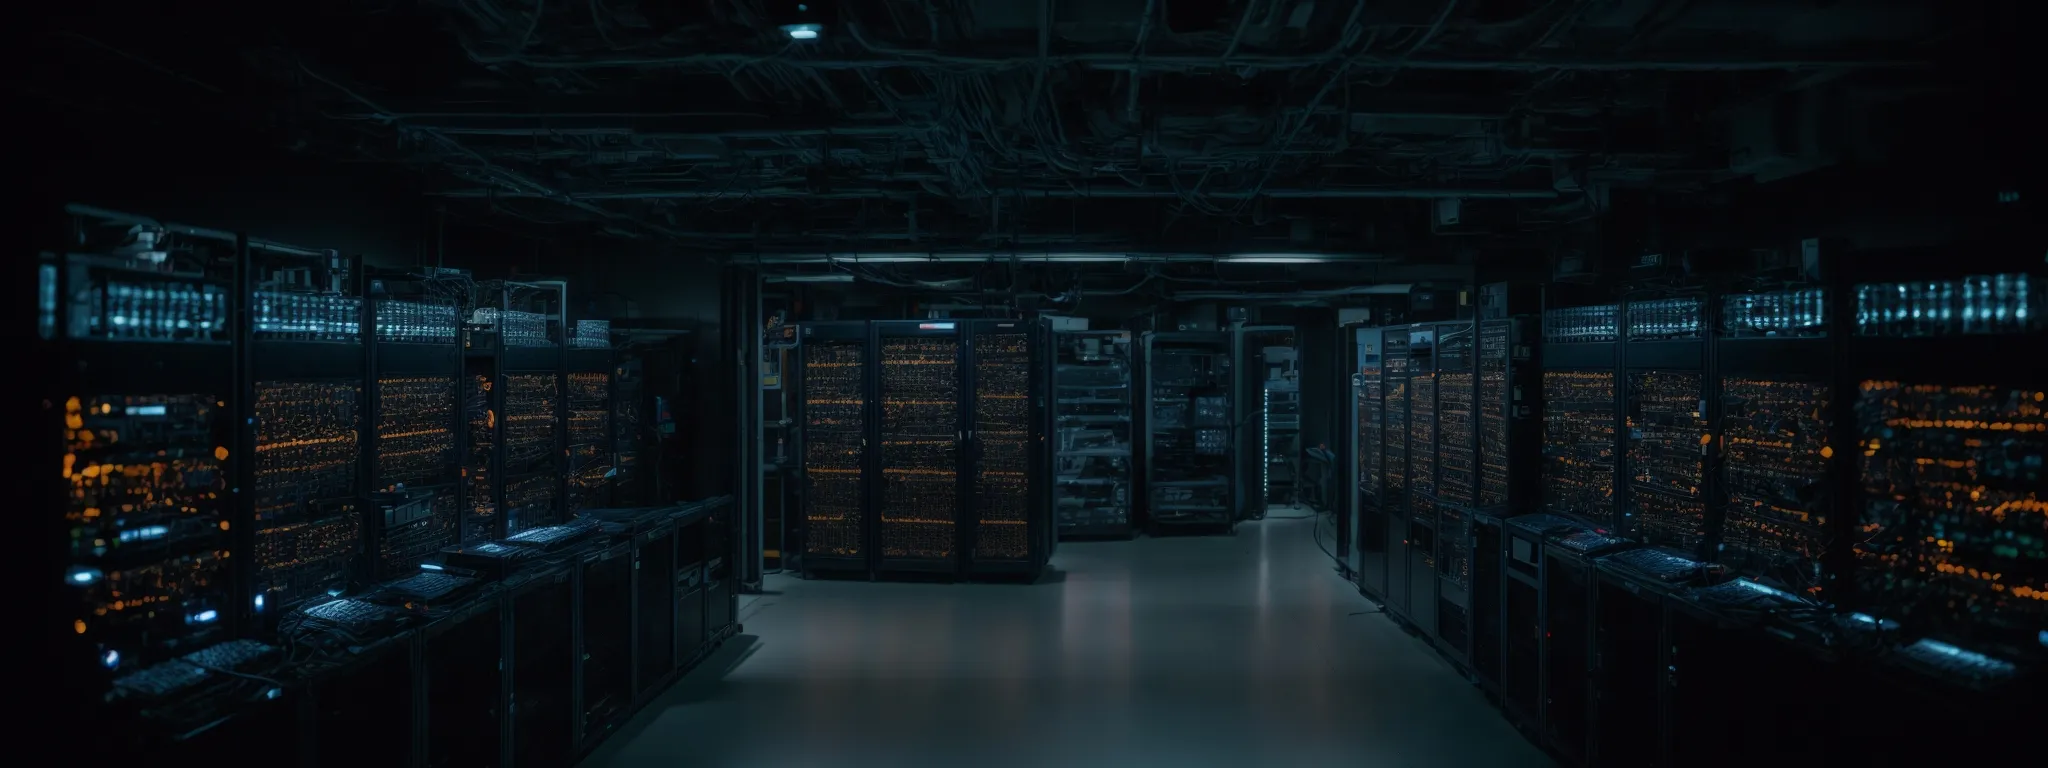 a server room with racks of networking equipment illuminated by flickering status lights.